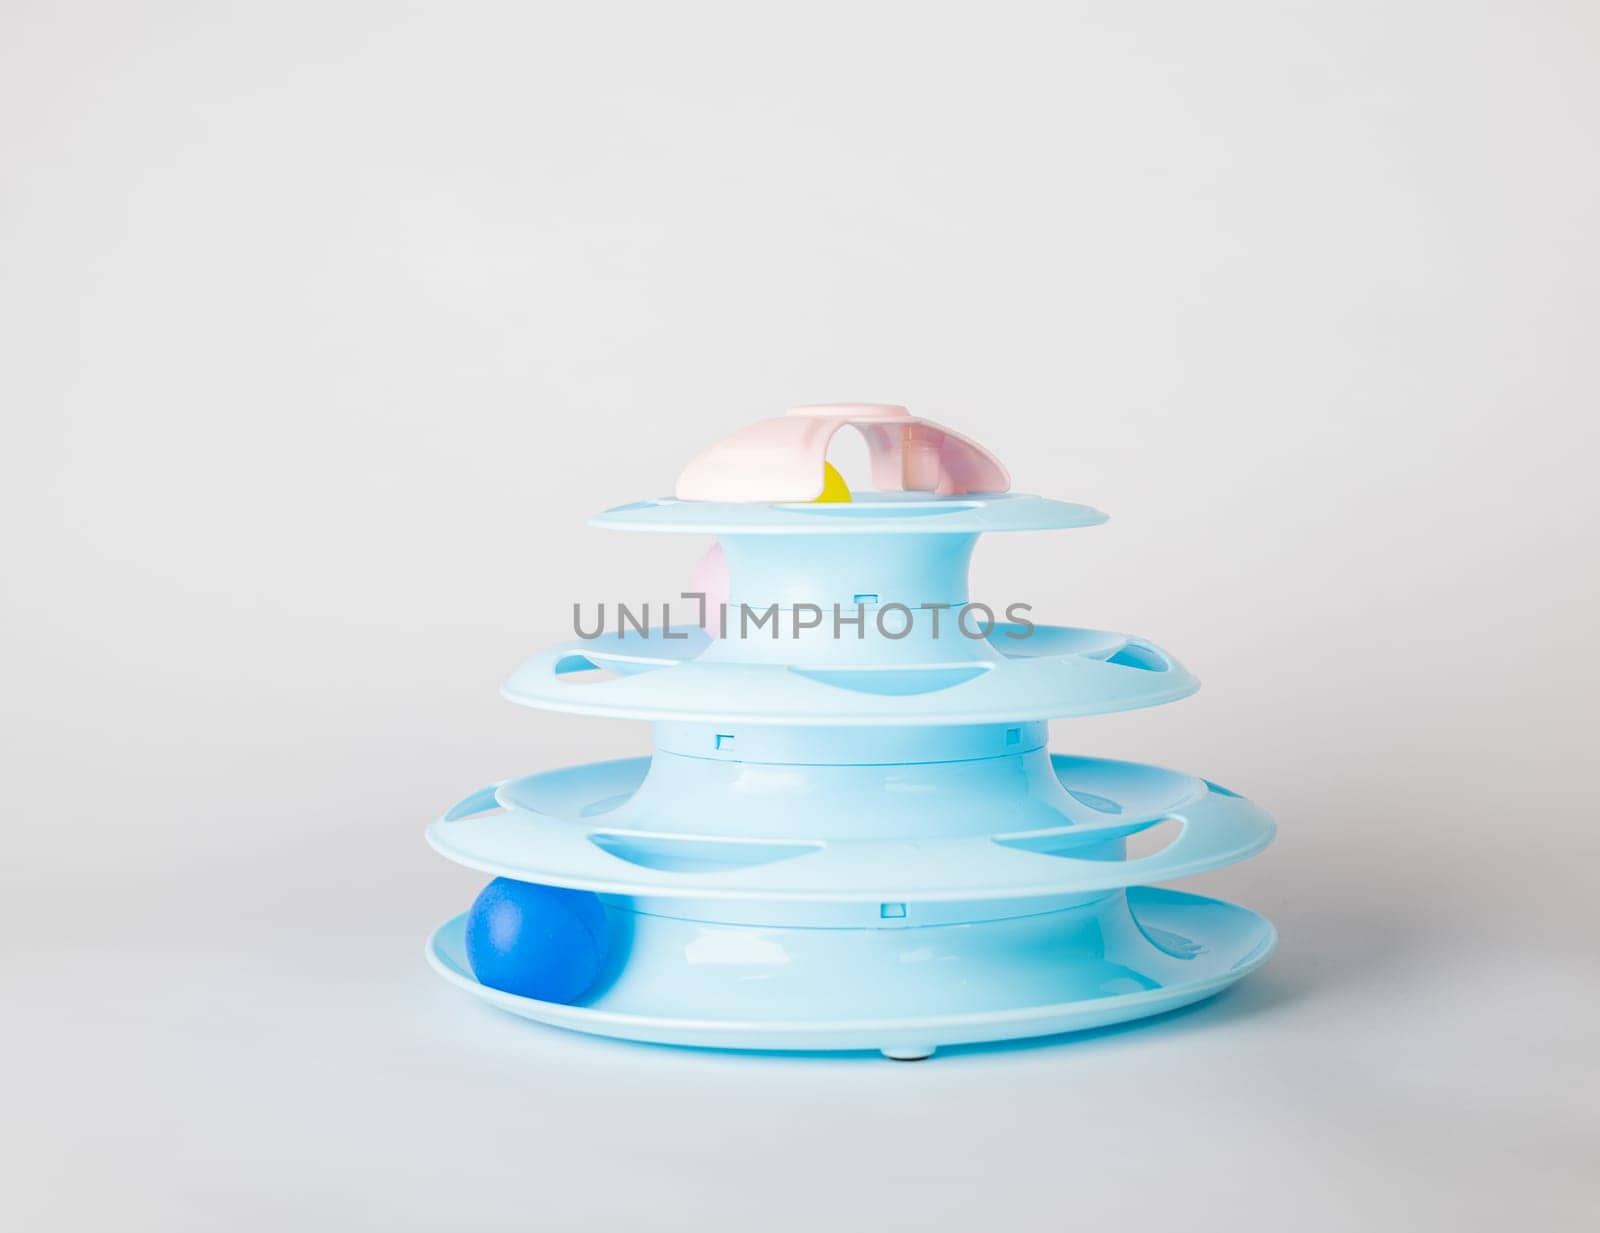 Cat's playtime showcased, a blue tower toy with a circular turntable and a moving ball, isolated on white. Witness feline intelligence and hunter instincts as the paw grips for fun. by Sorapop